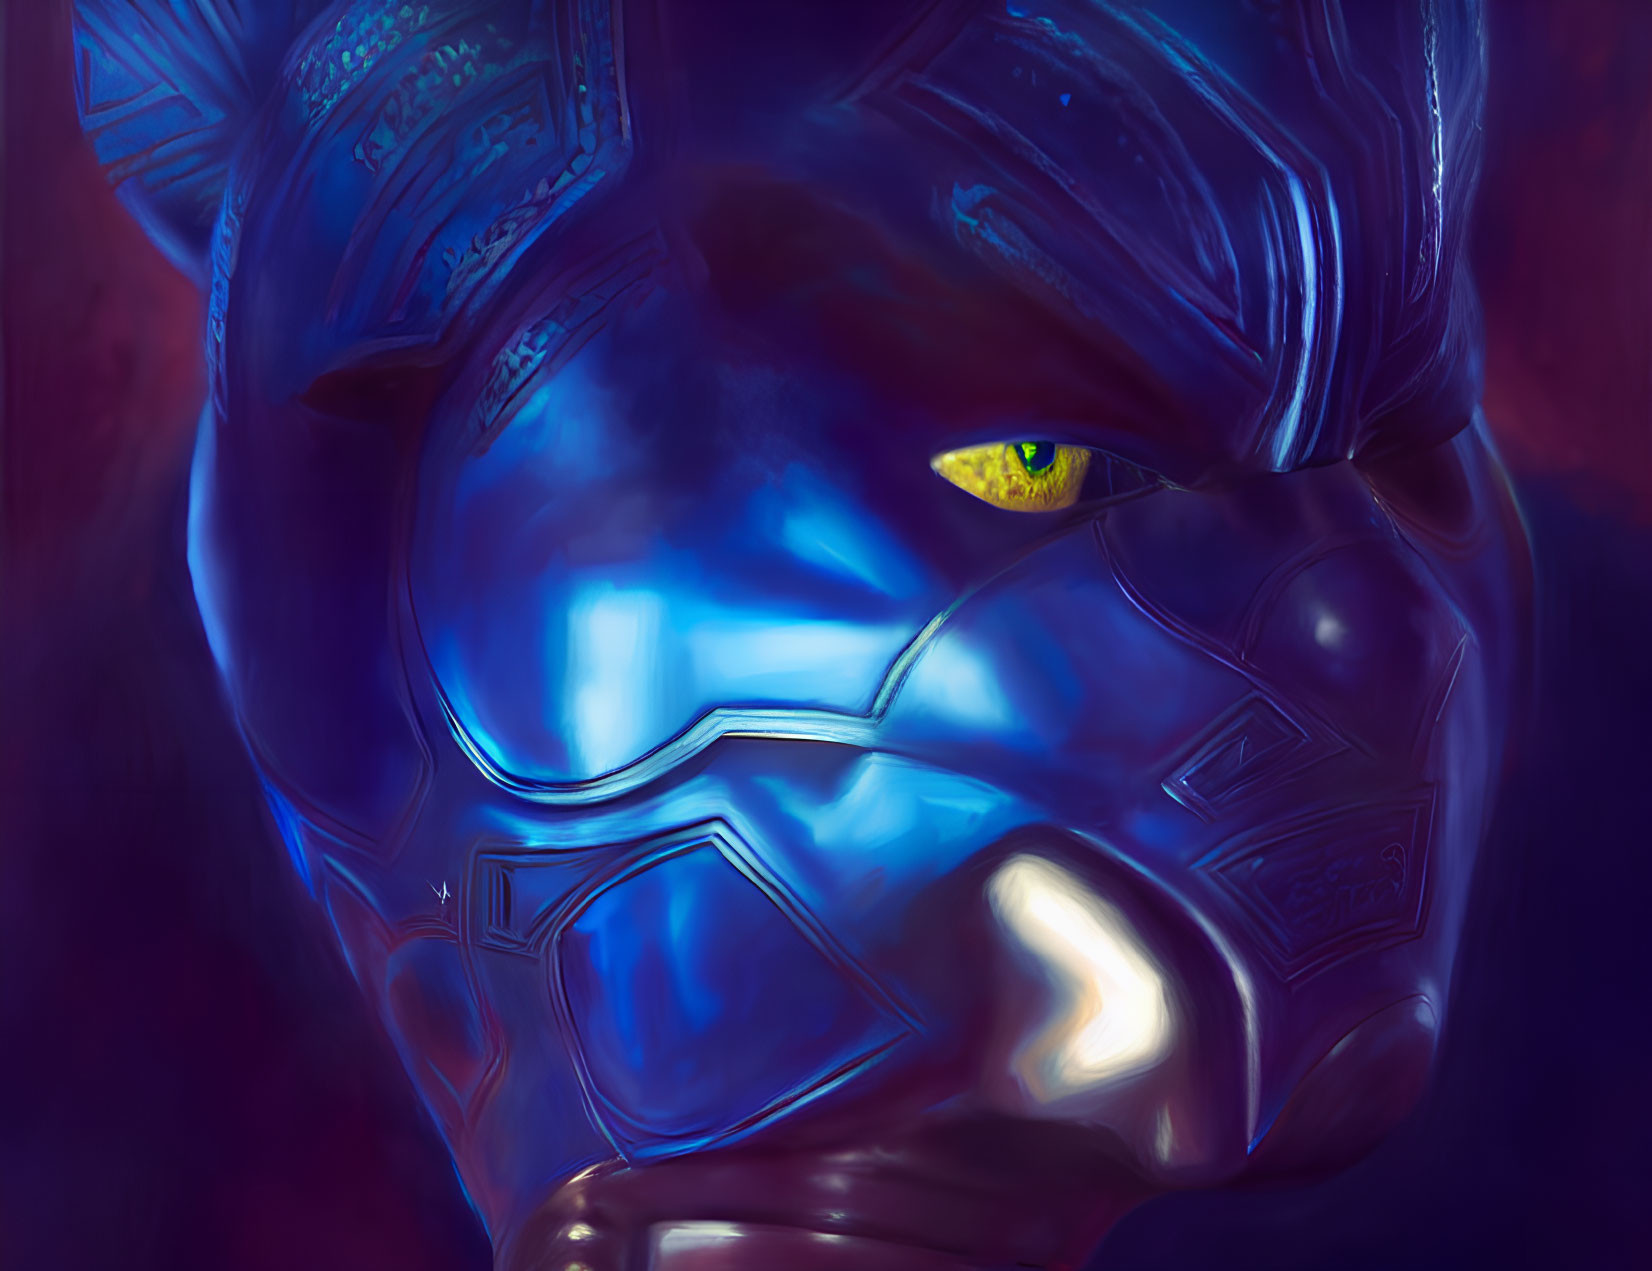 Detailed Close-Up of Character in Futuristic Blue Helmet